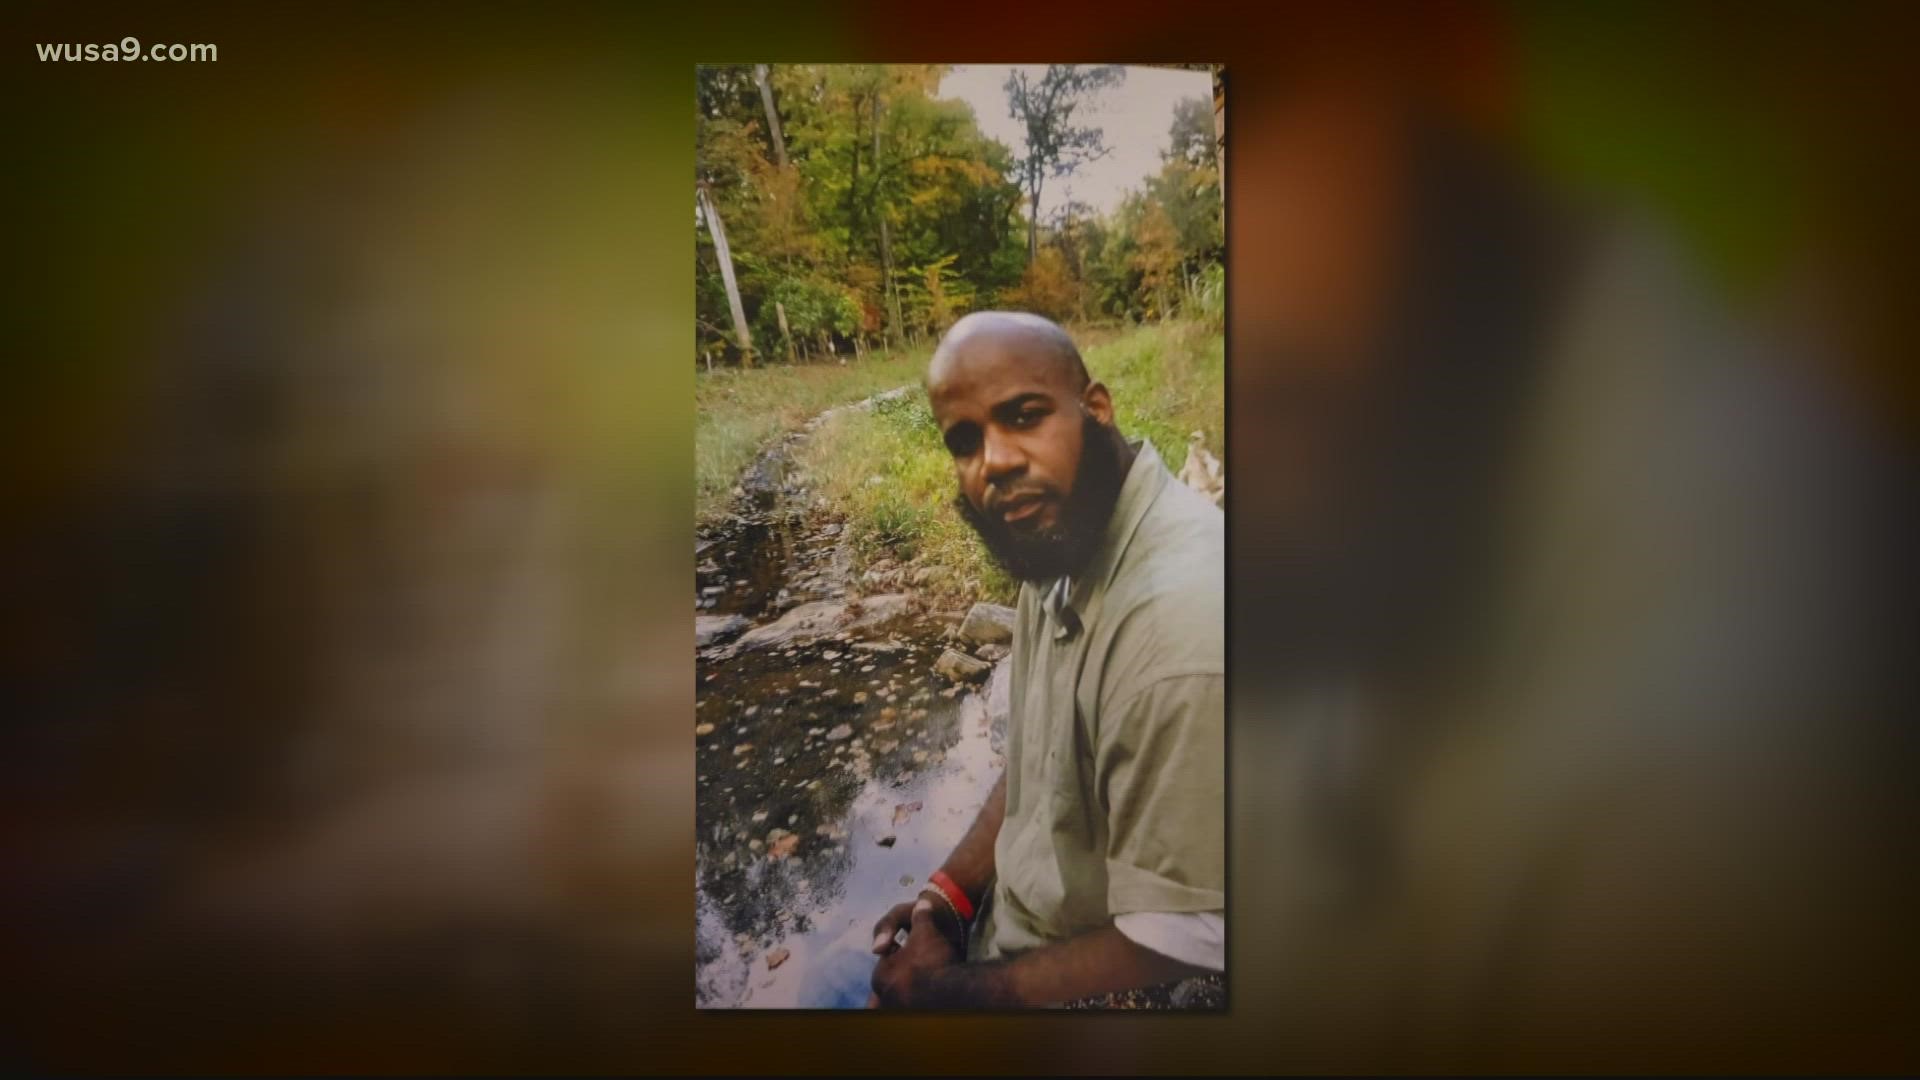 911 calls show a possible 30-minute delay in getting police on the scene to help and the man's family believes his death could have been prevented.